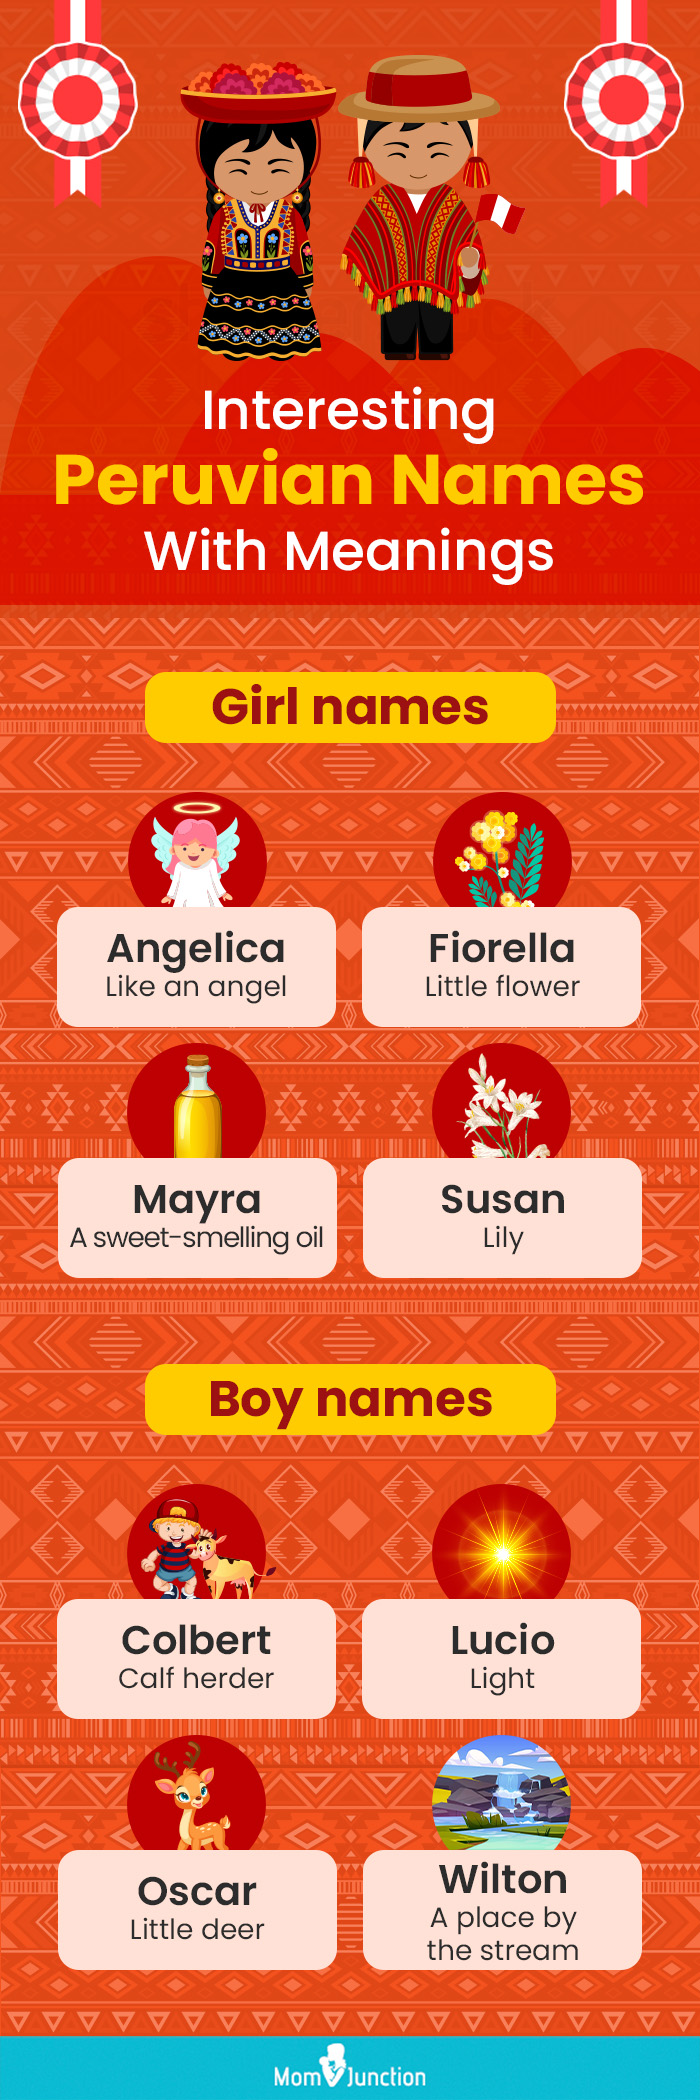 interesting peruvian names with meanings (infographic)